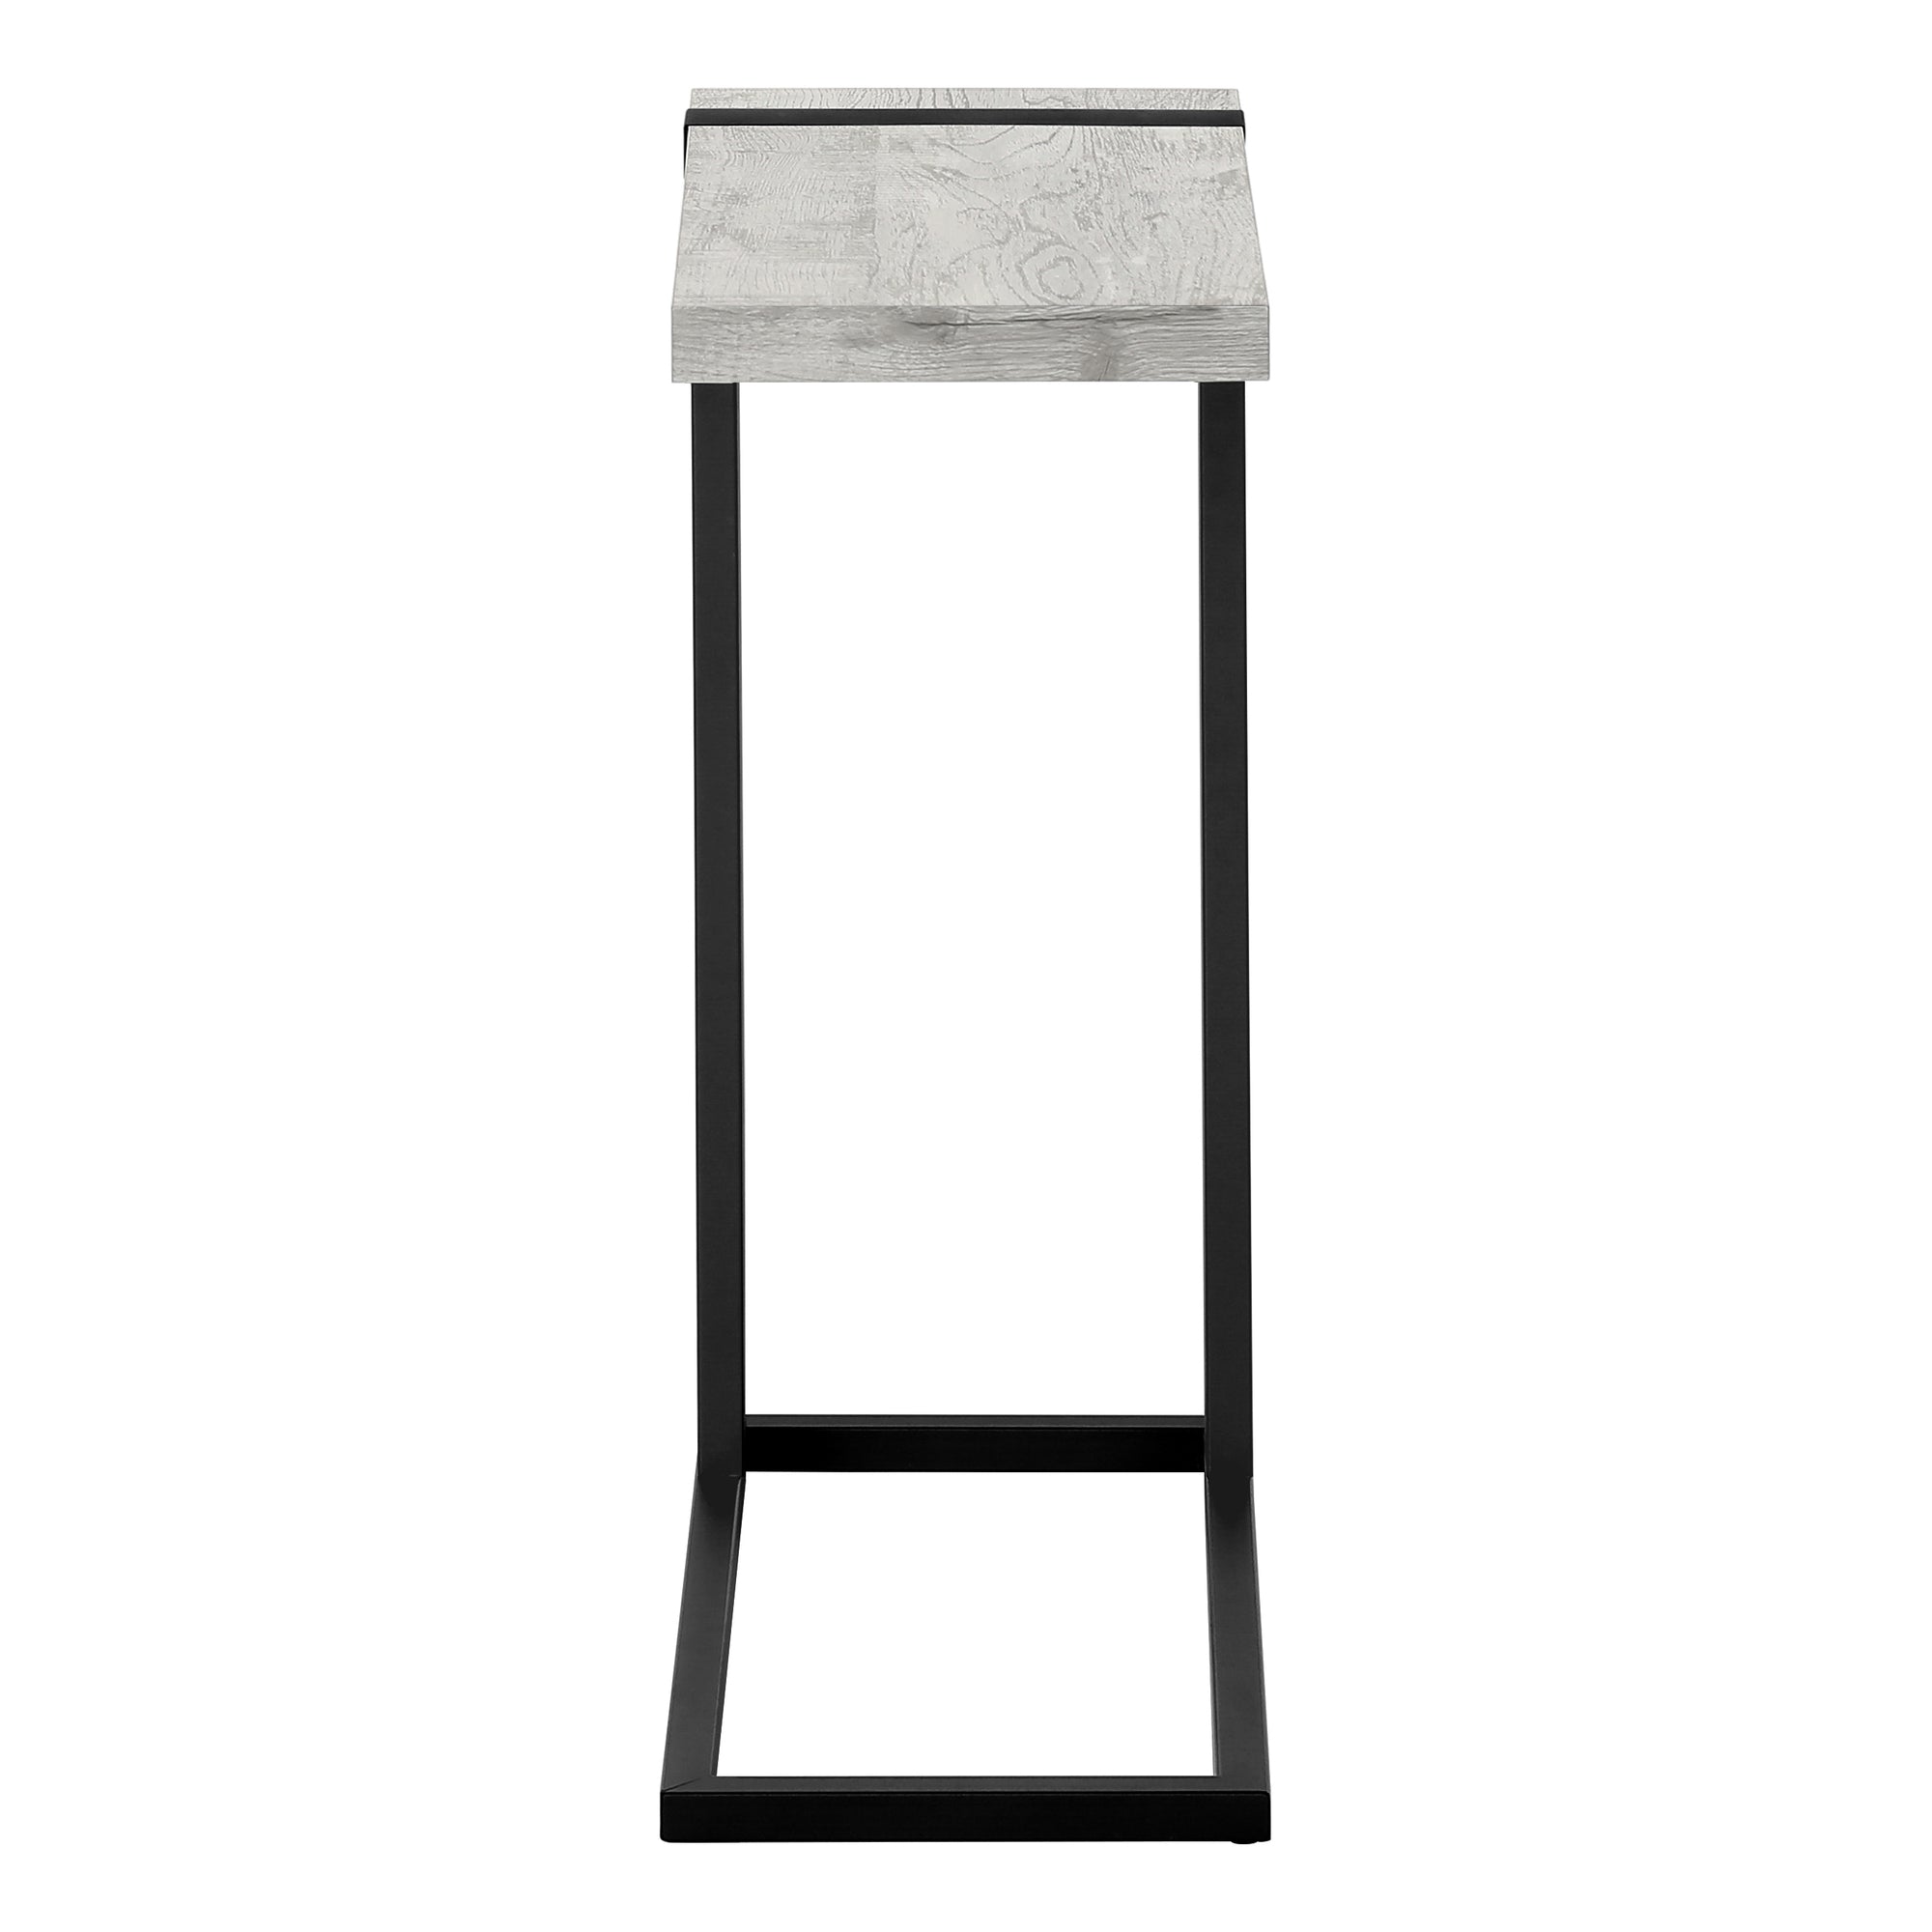 MN-622858    Accent Table, C-Shaped, End, Side, Snack, Living Room, Bedroom, Metal Legs, Laminate, Grey Reclaimed Wood Look, Black, Contemporary, Industrial, Modern